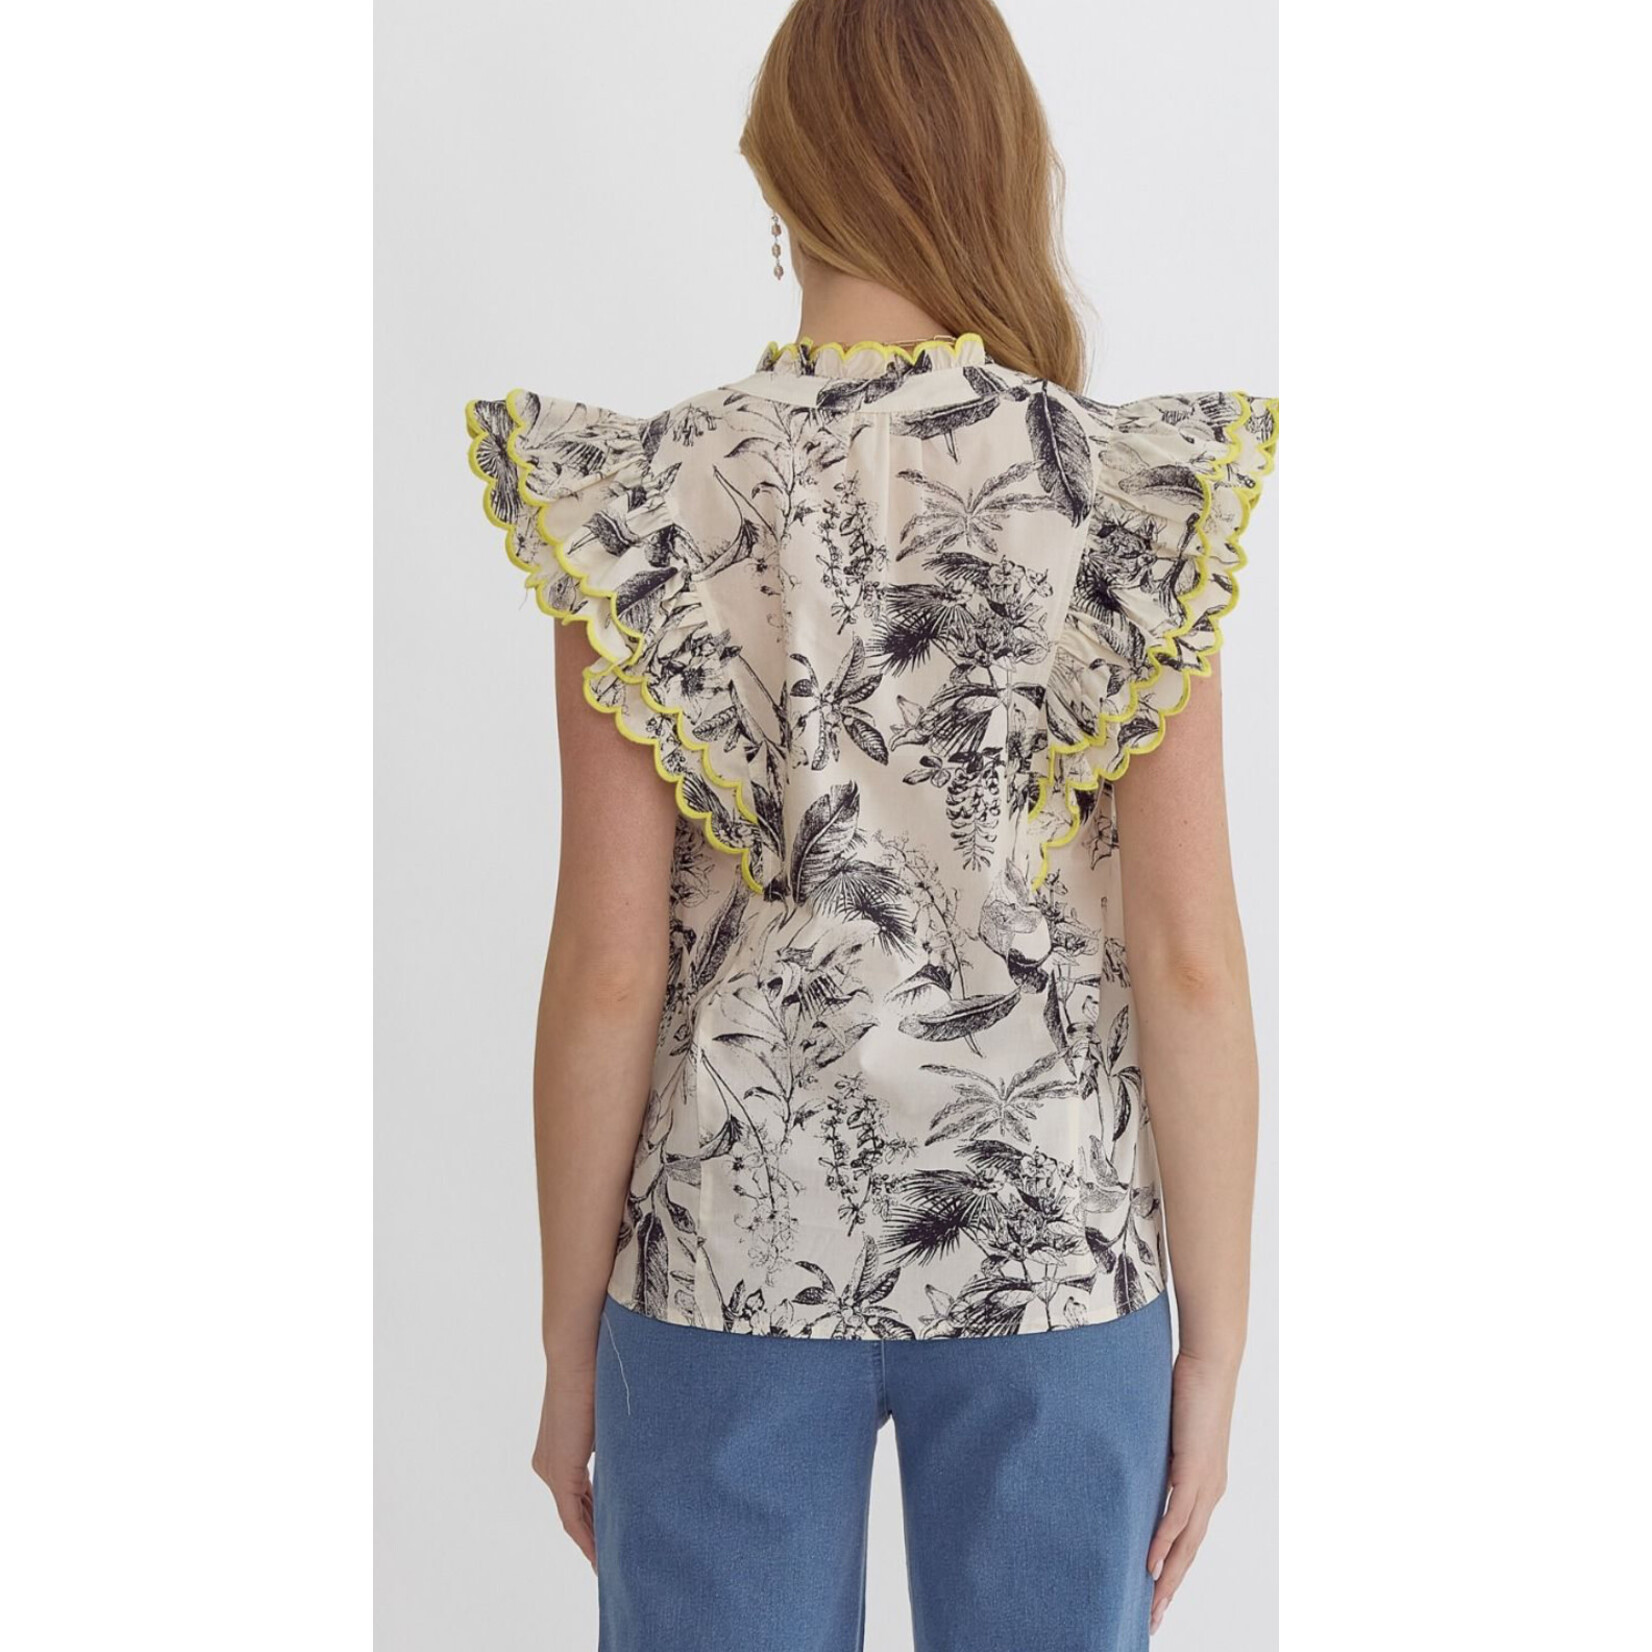 The Melissa Top